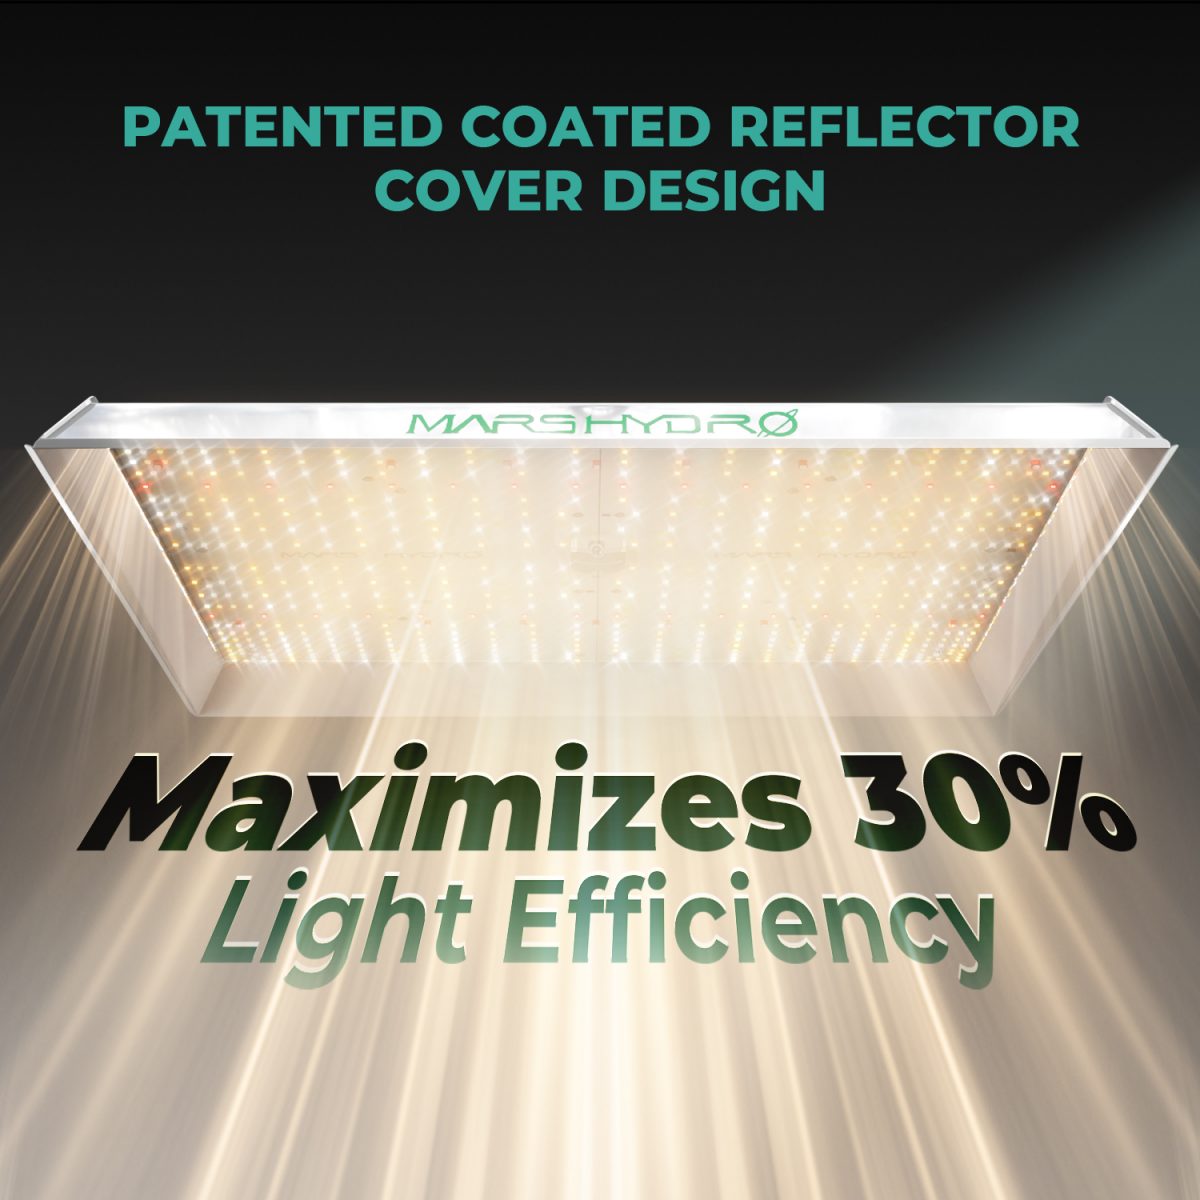 Mars Hydro TSW2000 PATENTED COATED REFLECTOR COVER DESIGN